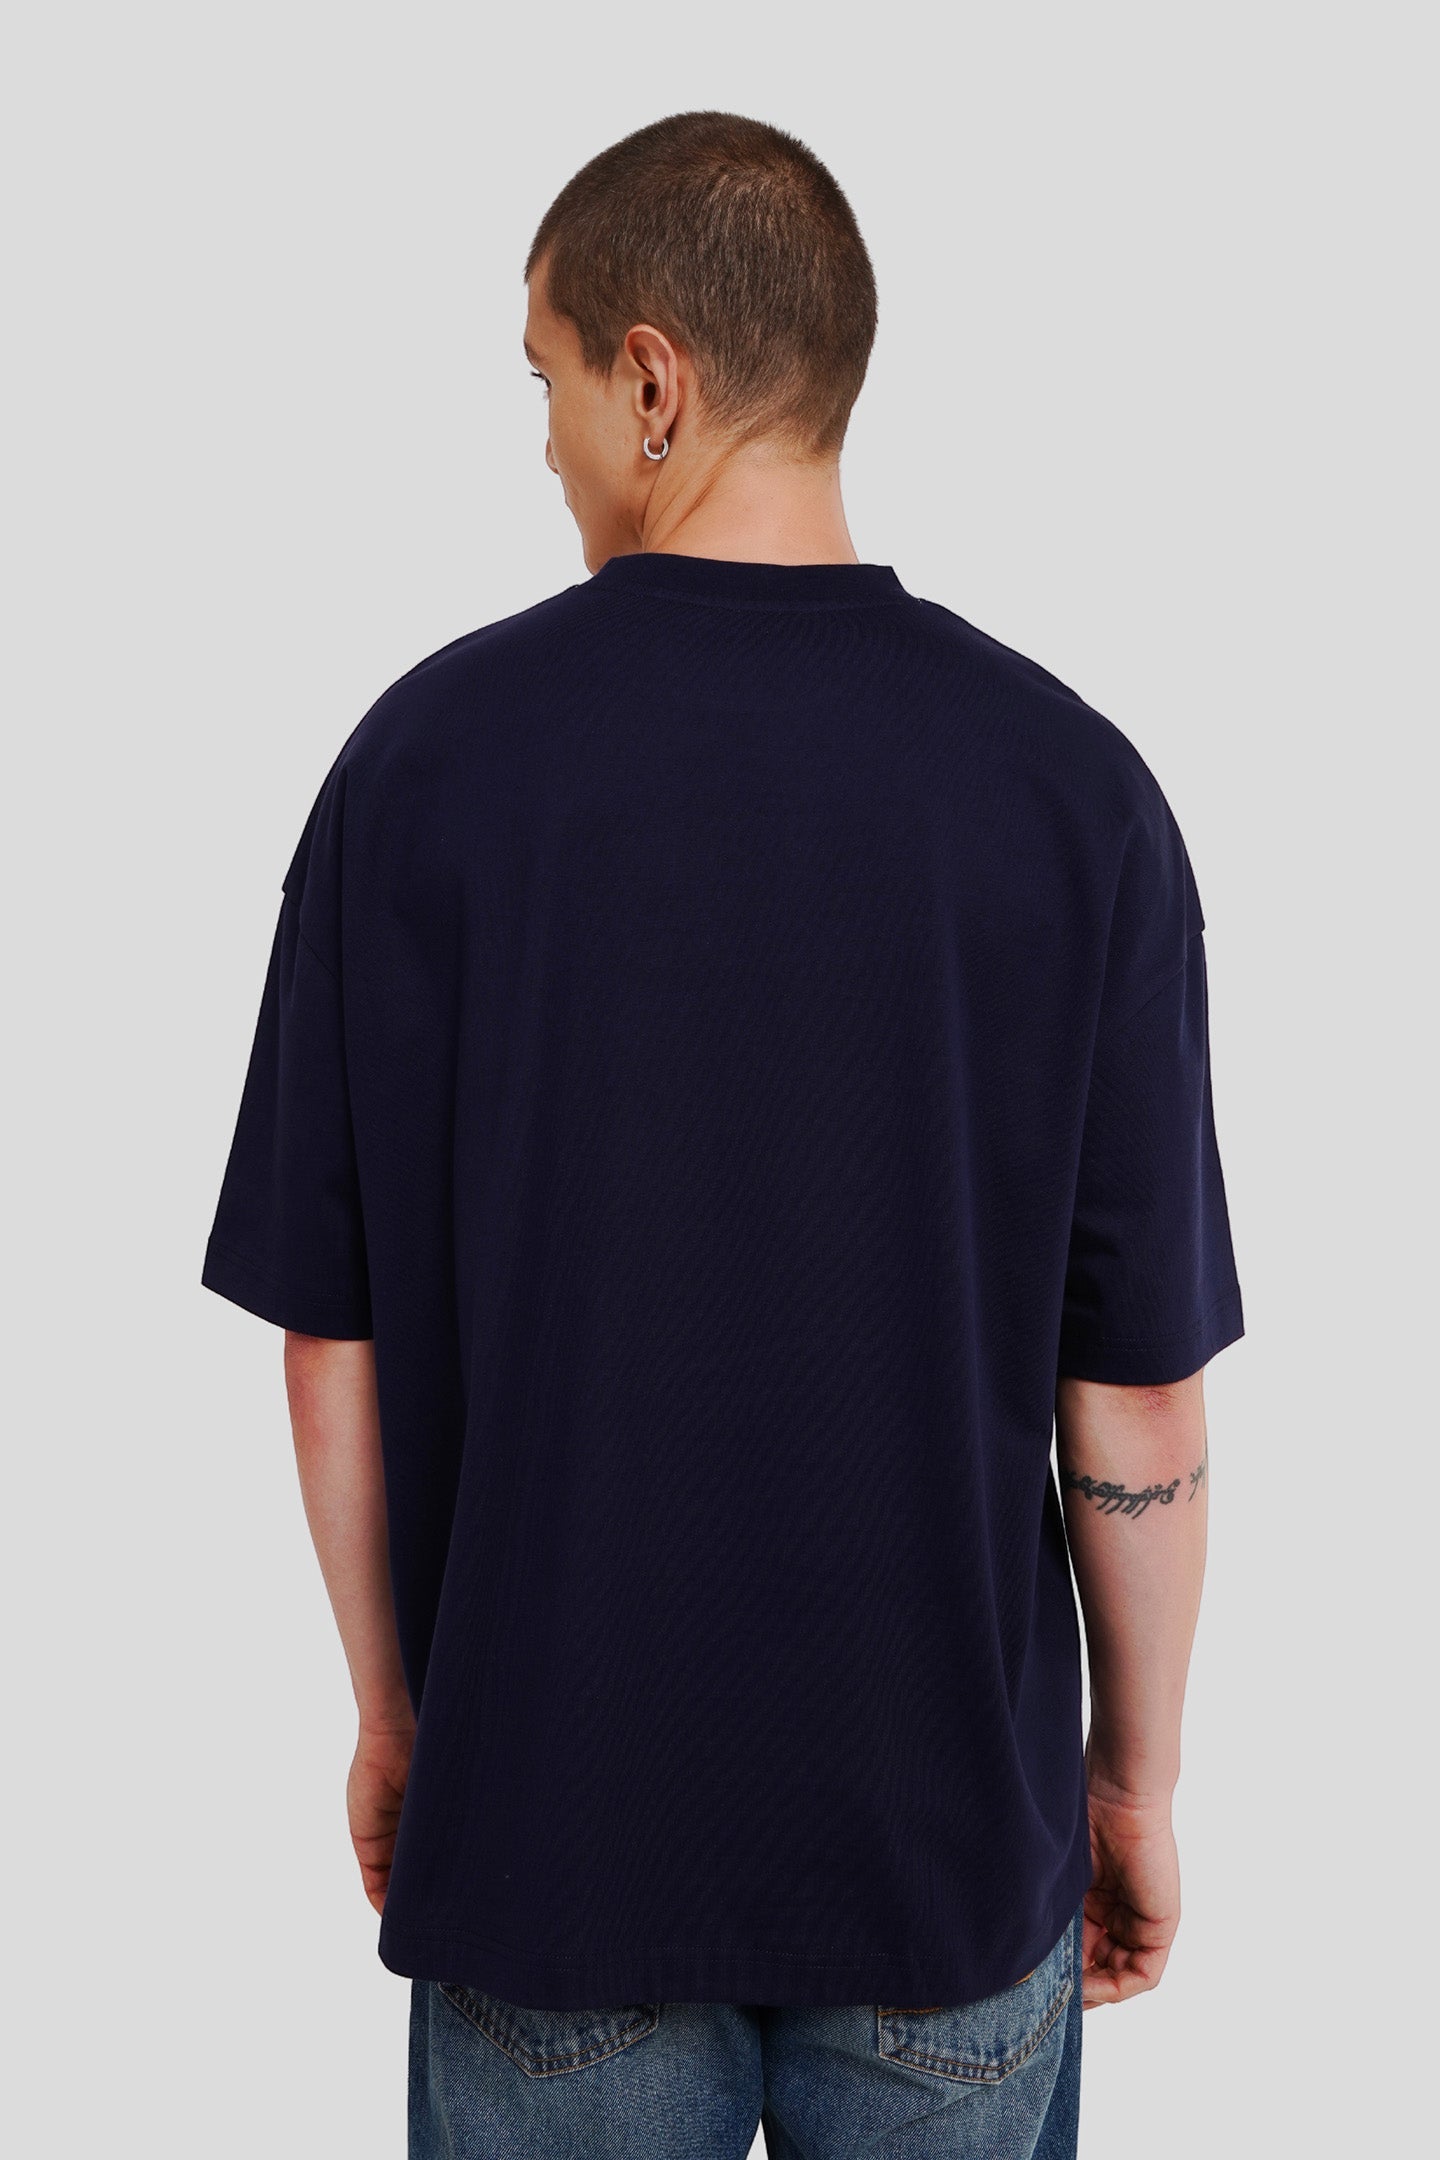 All I Want Navy Blue Printed T Shirt Men Baggy Fit With Front Design Pic 2